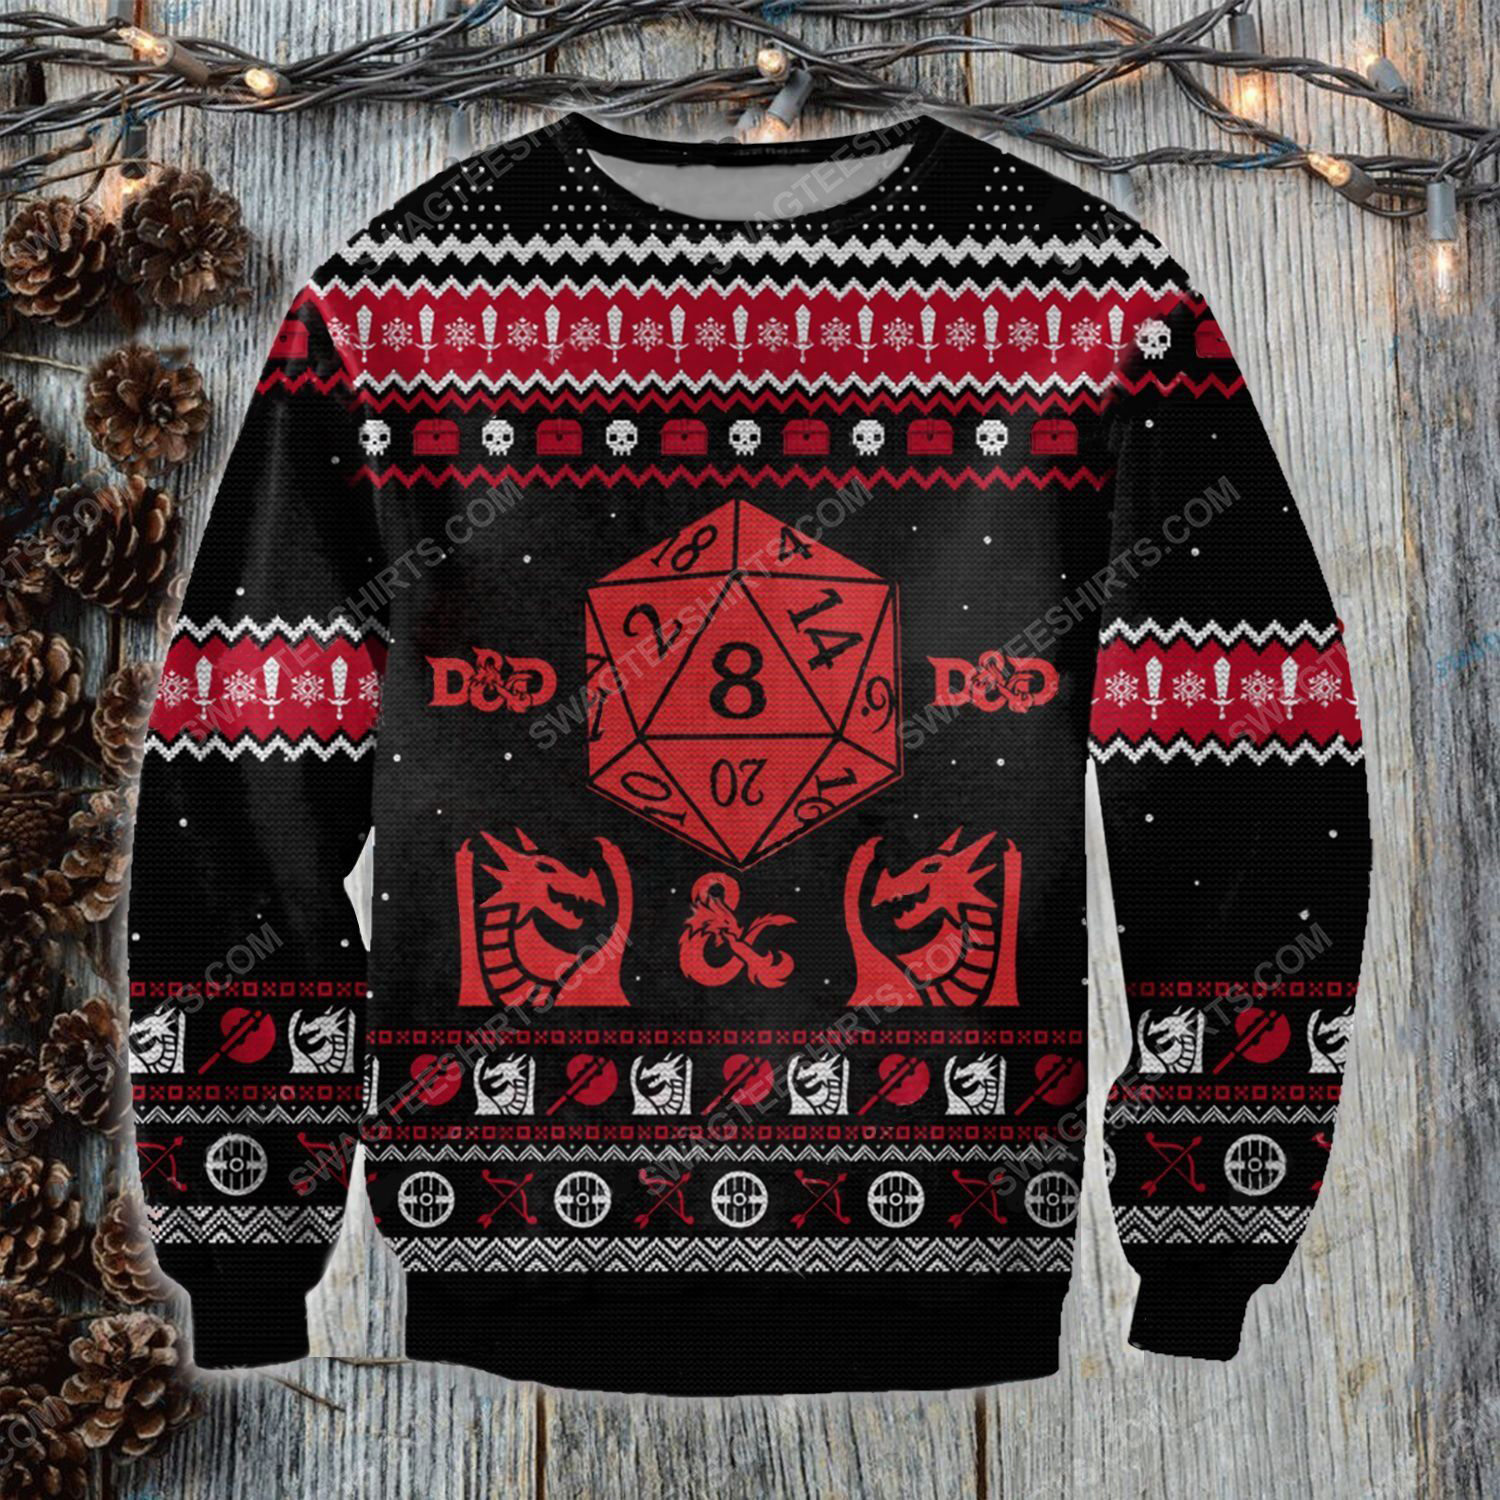 [special edition] The dungeons and dragons game ugly christmas sweater